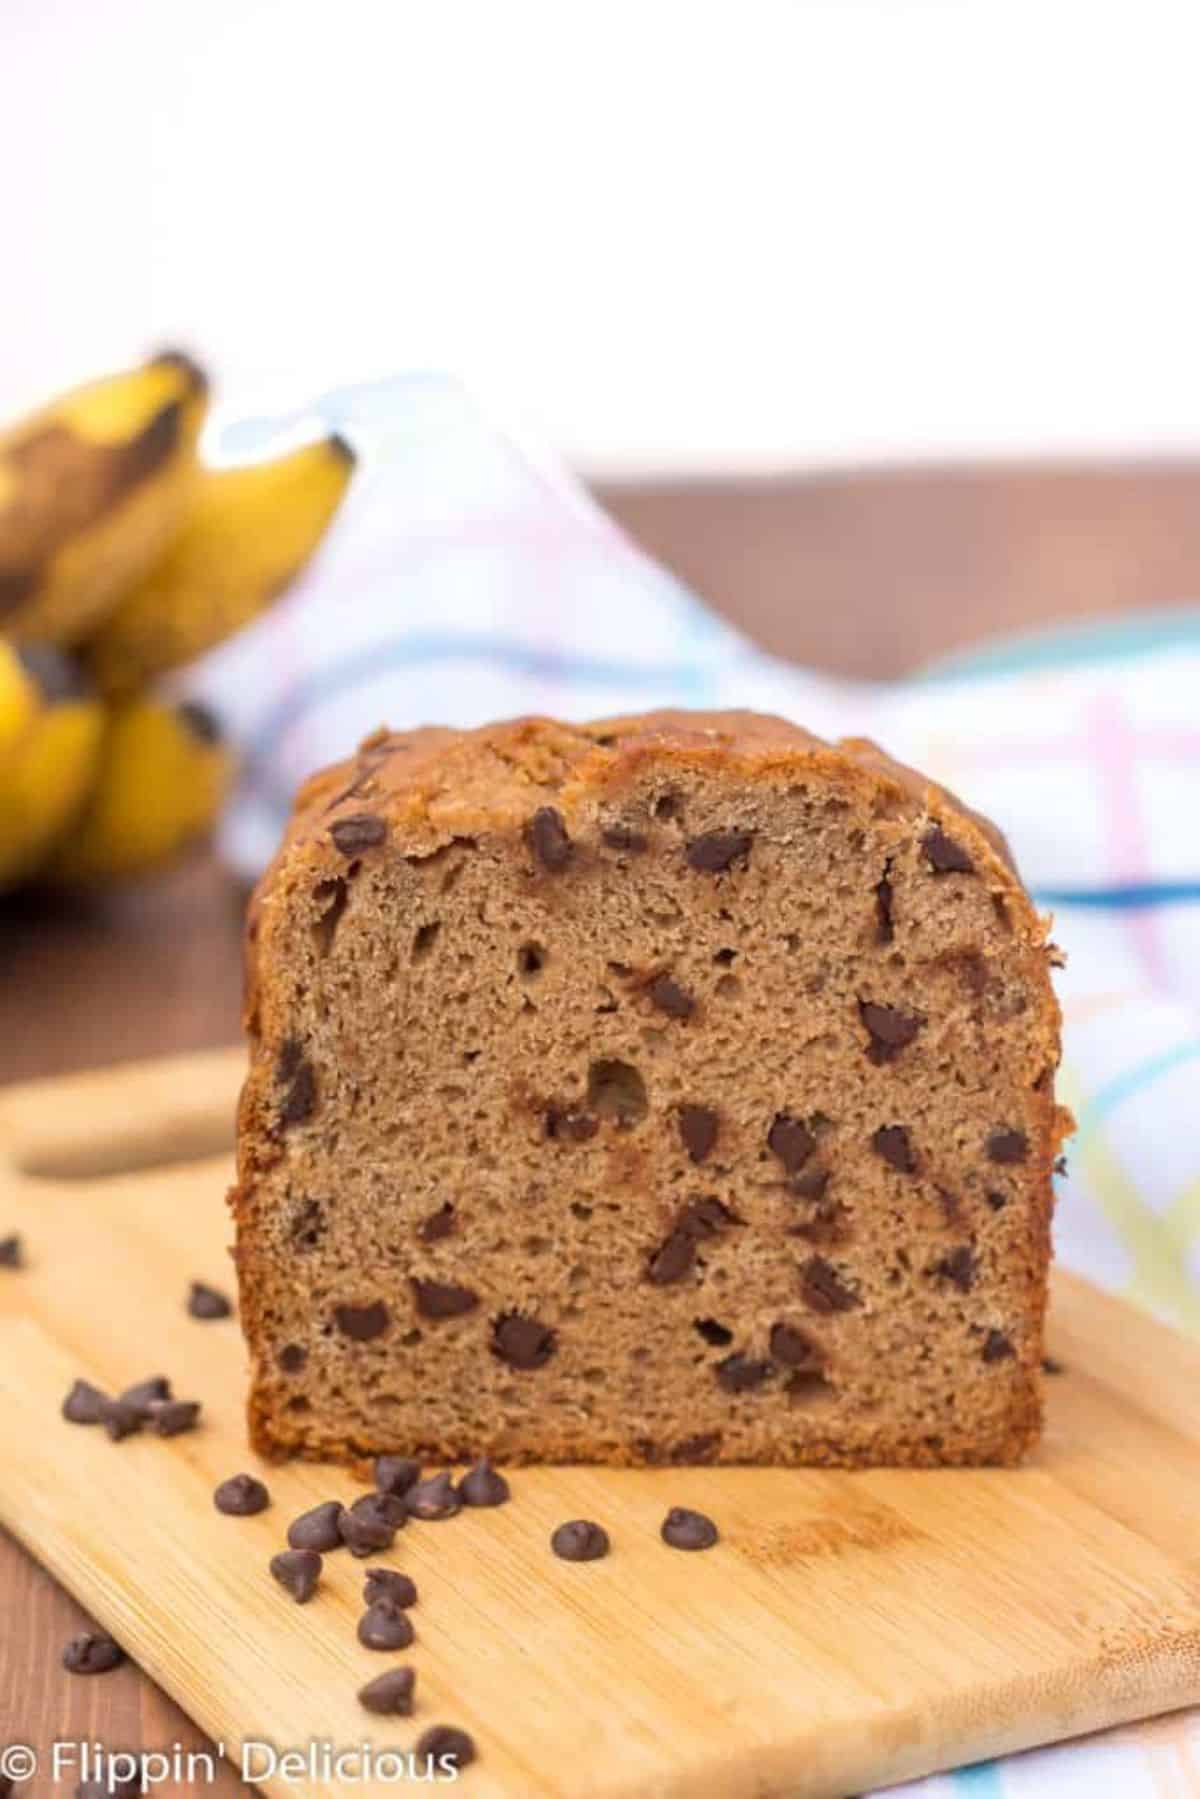 Flavorful Gluten-Free Chocolate Chip Banana Bread on a wooden cutting board.